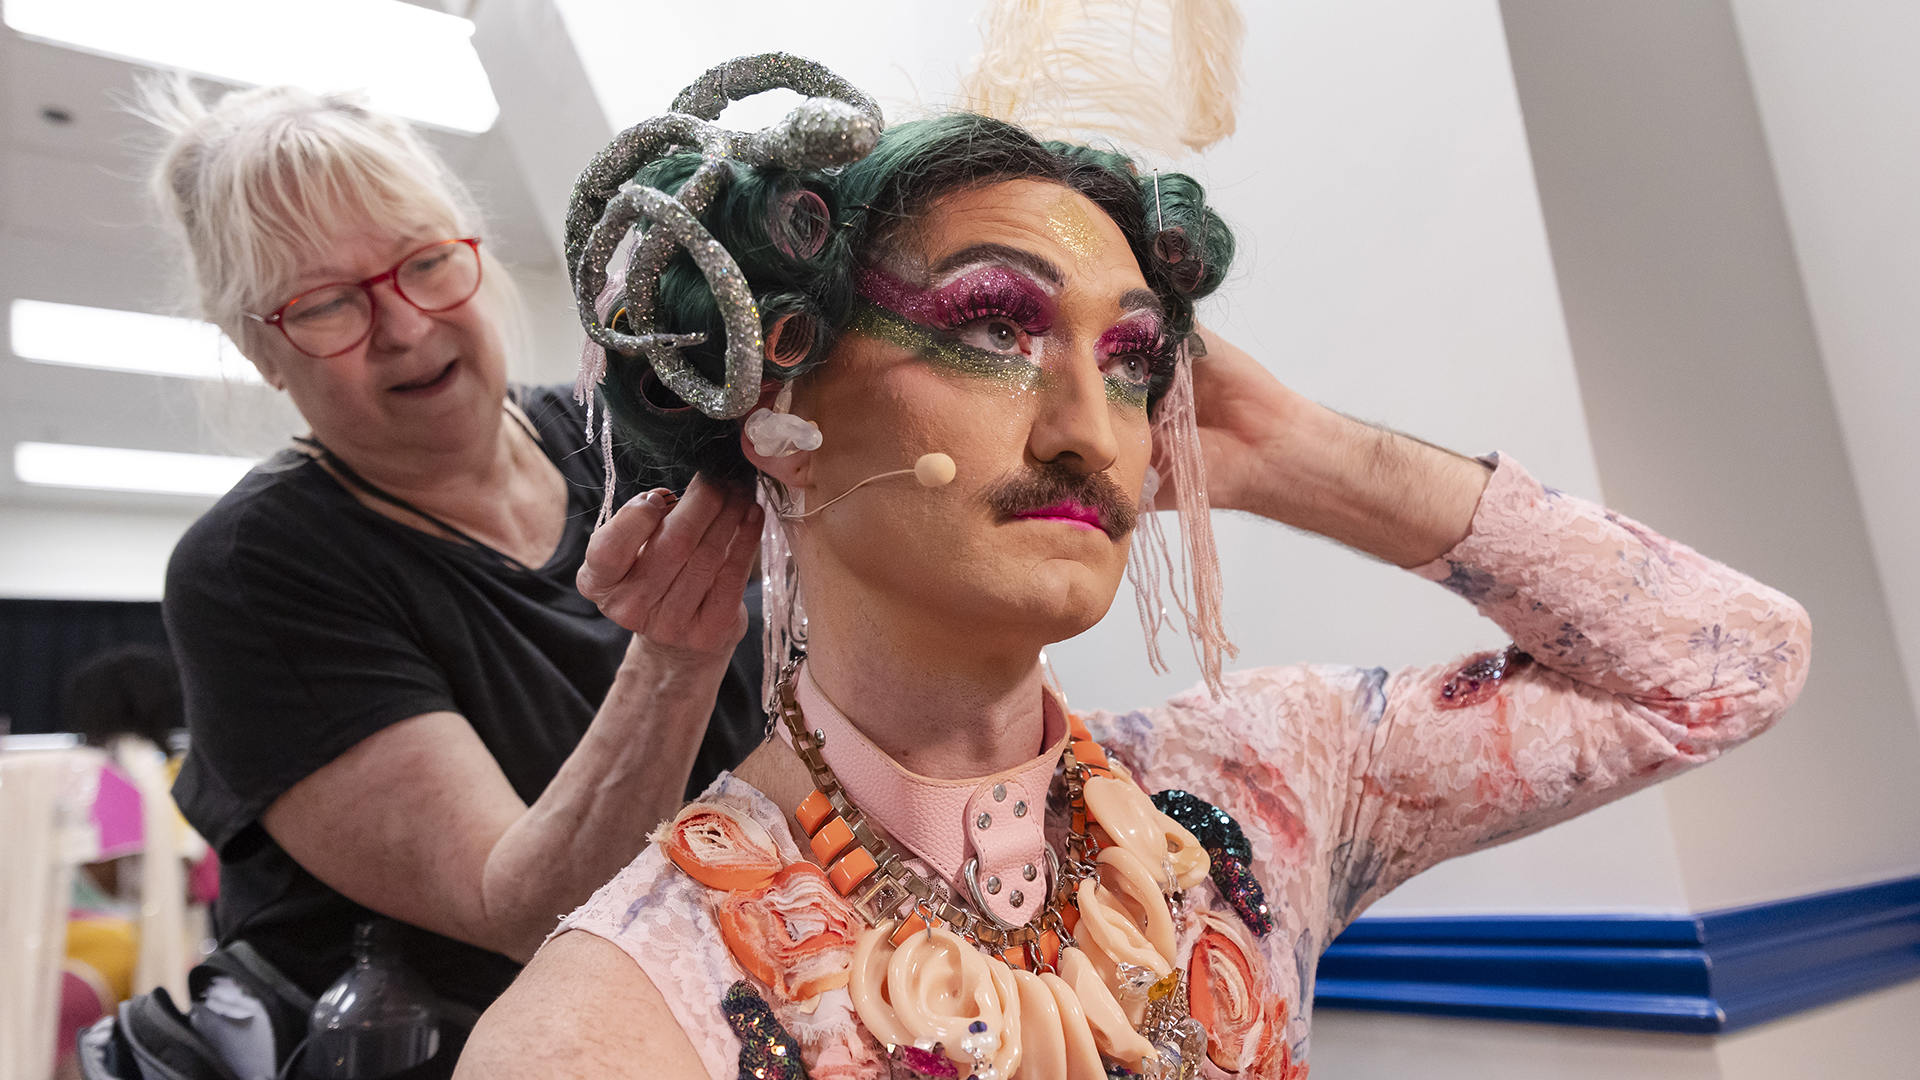 a wardrobe supervisor helps attach a wig to a performer with greenish hair in curlers and a silver sequin snake atop his head. The performer has a mustache and long fake lashes with green and magenta eye makeup and is wearing a pink lace top and a necklace of plastic ears.